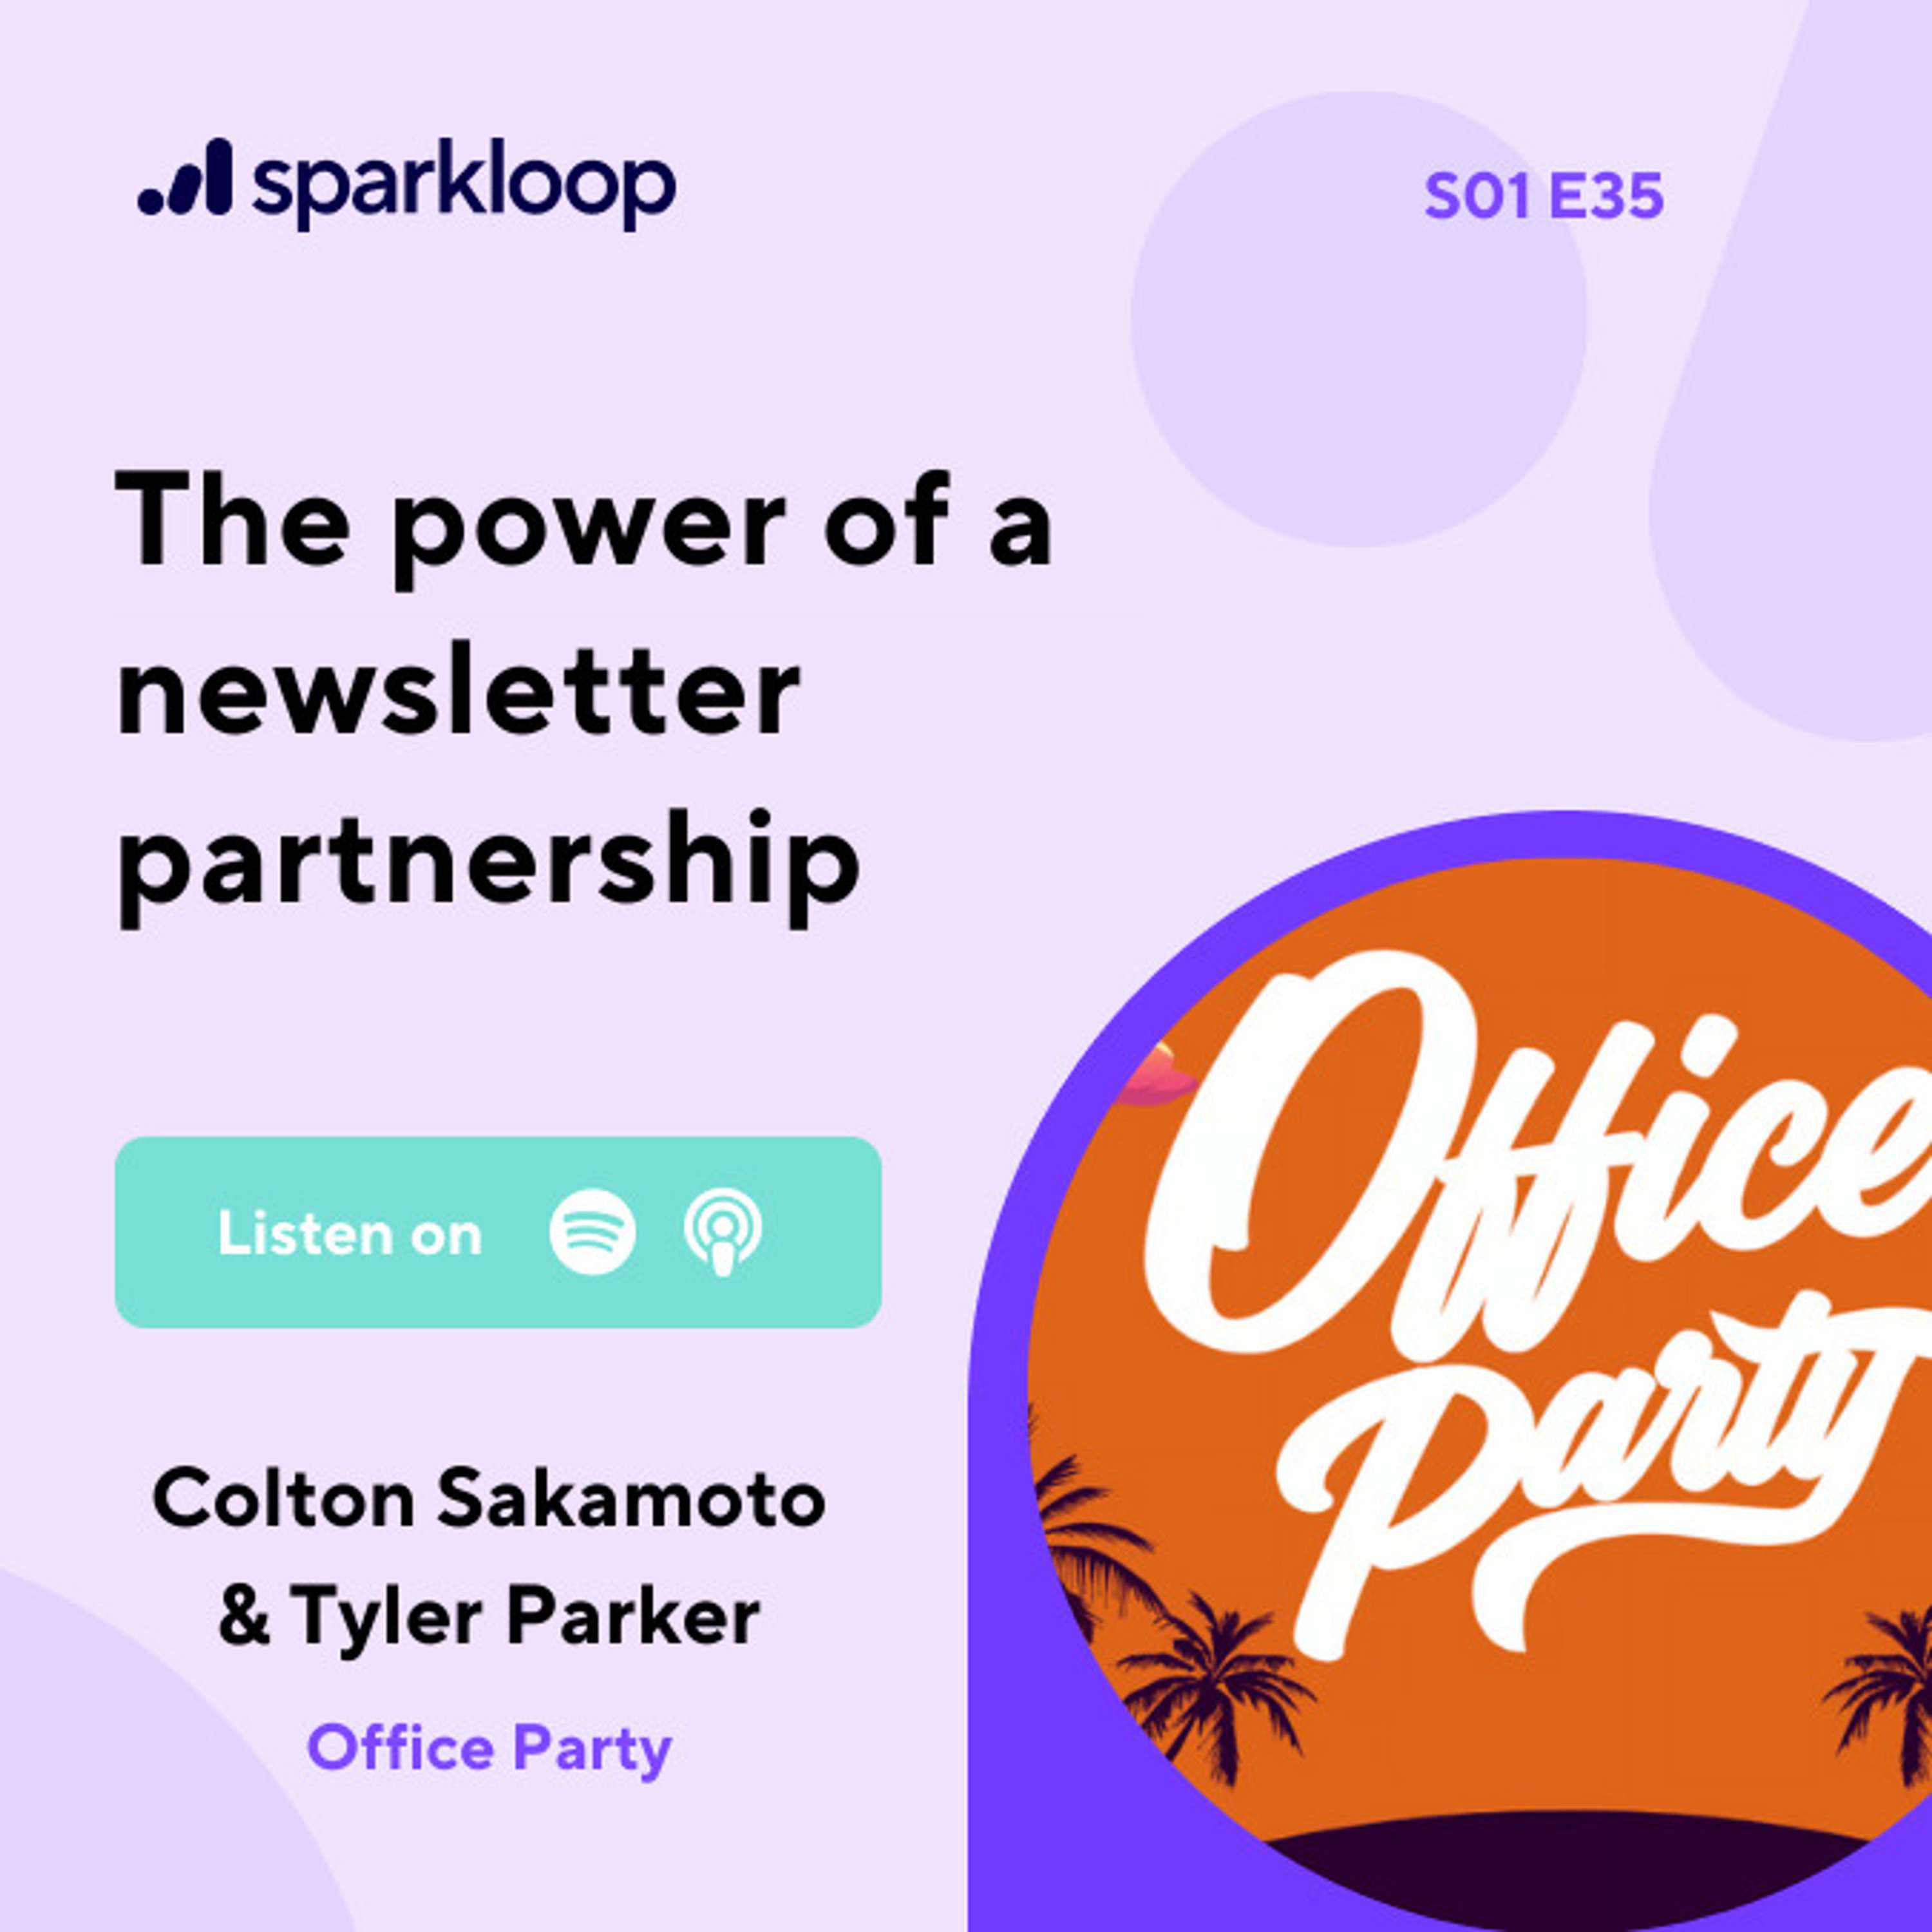 The Power of Partnership - with Colton Sakamoto and Tyler Parker of Office Party